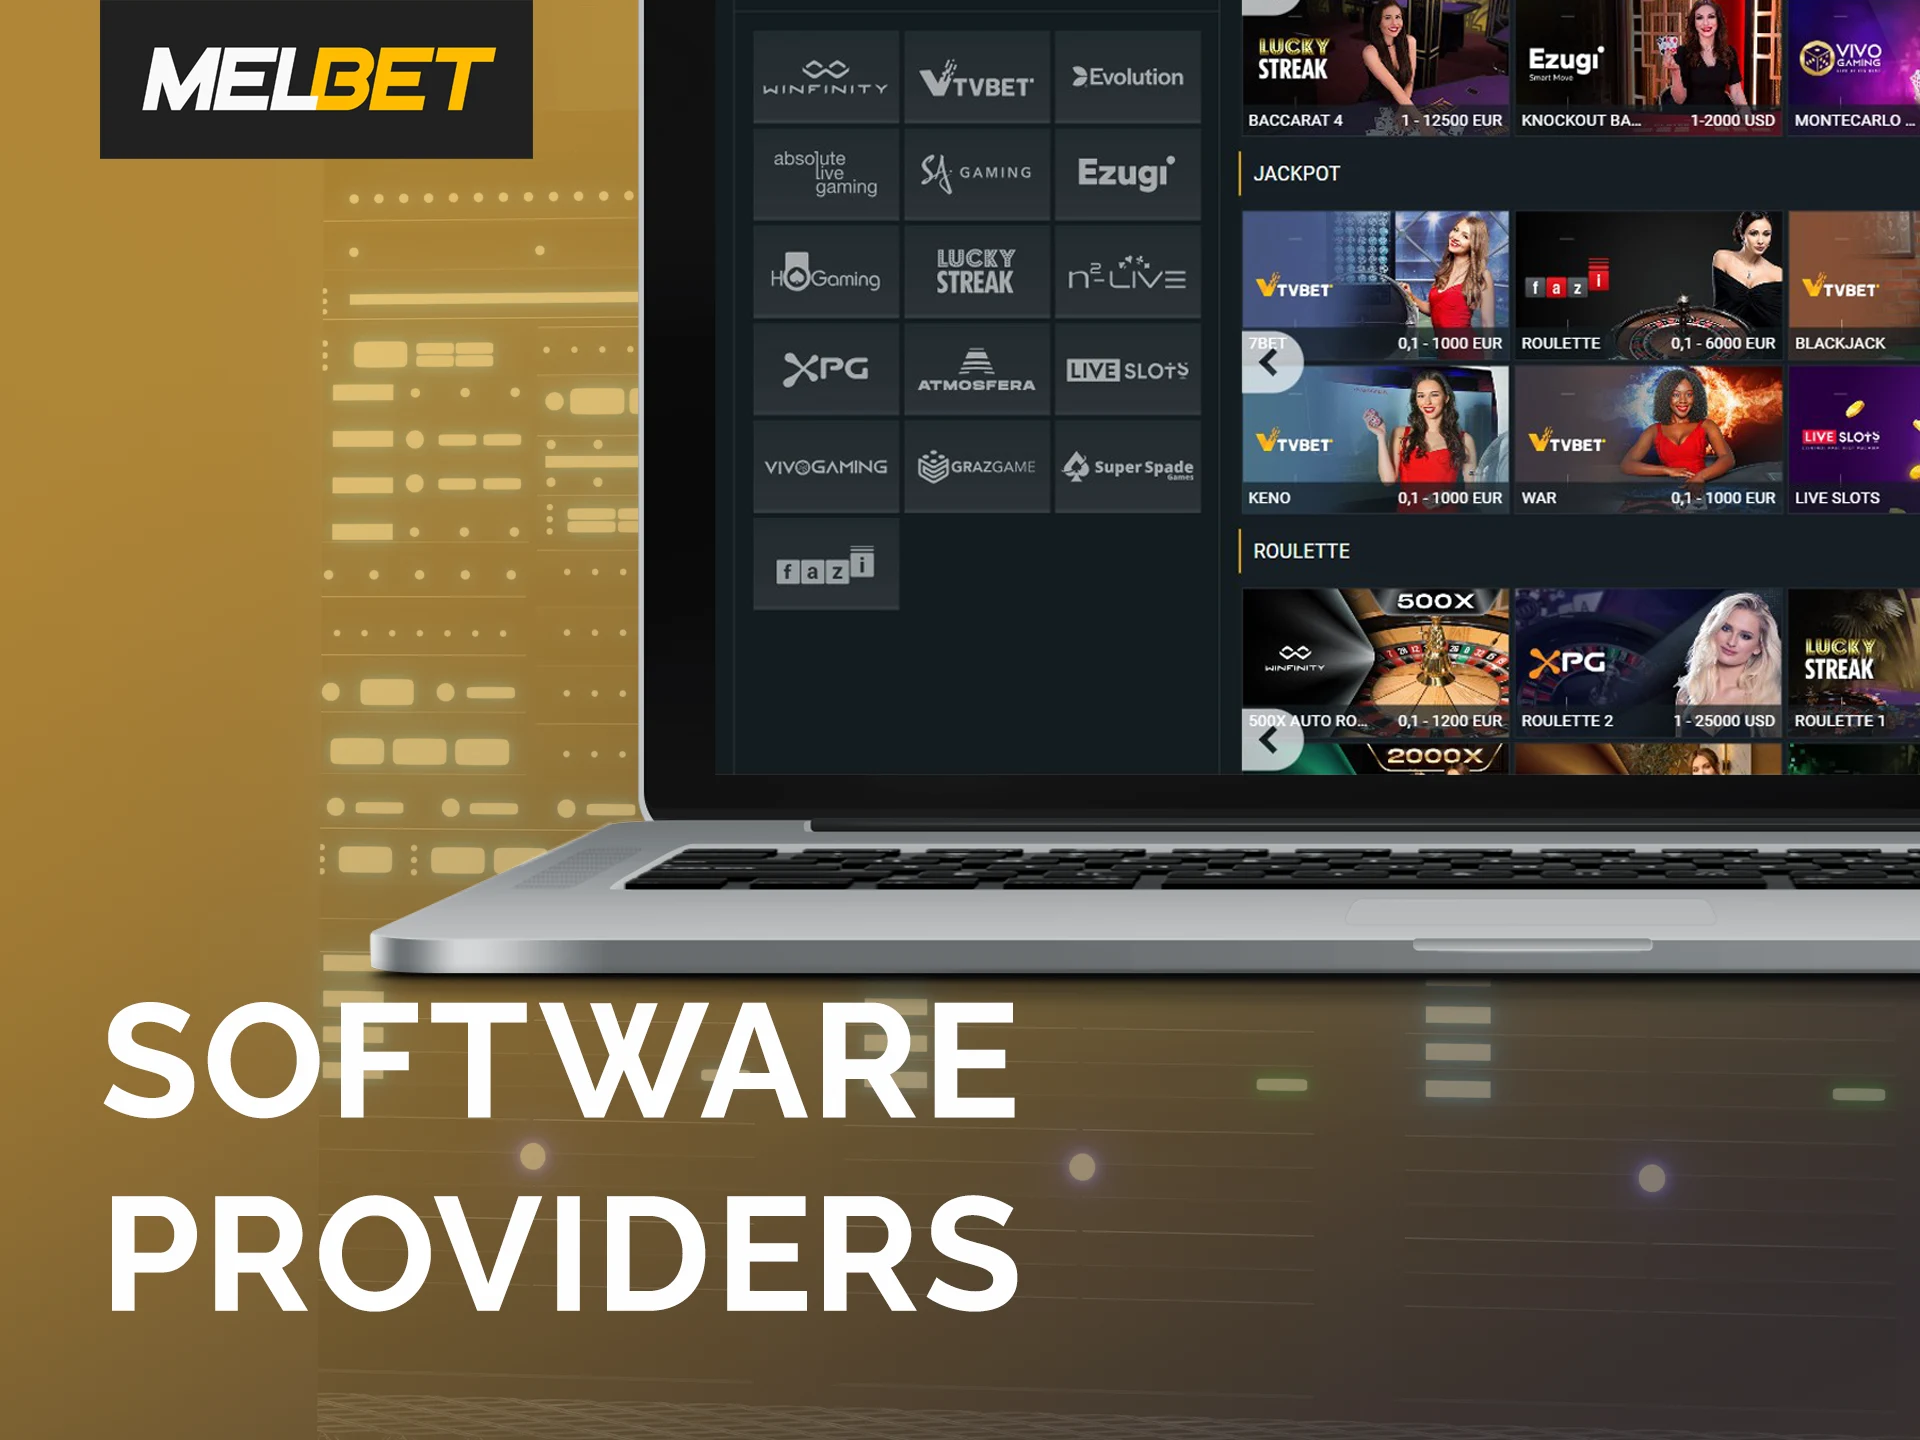 These providers offer a wide variety of games.